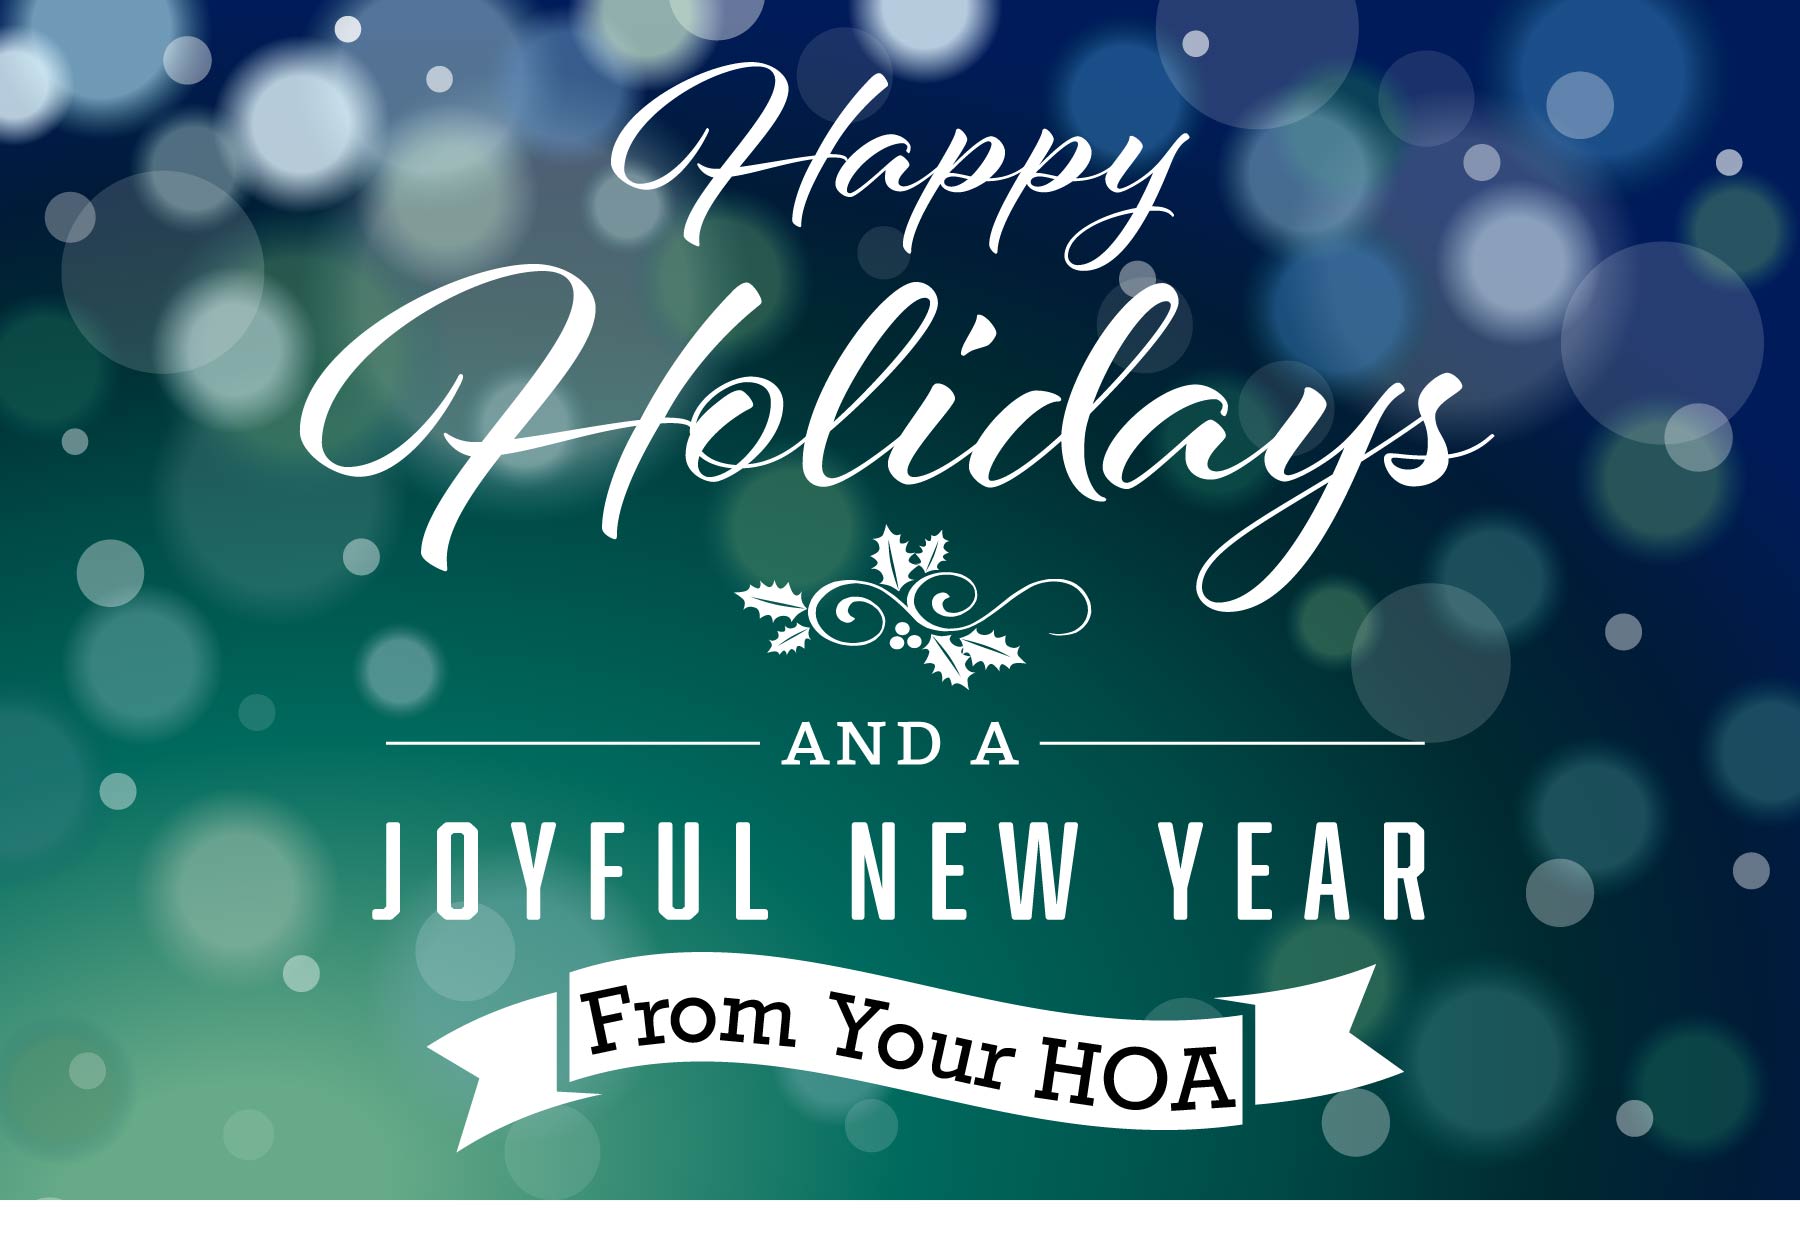 Holiday Greetings from Your HOA